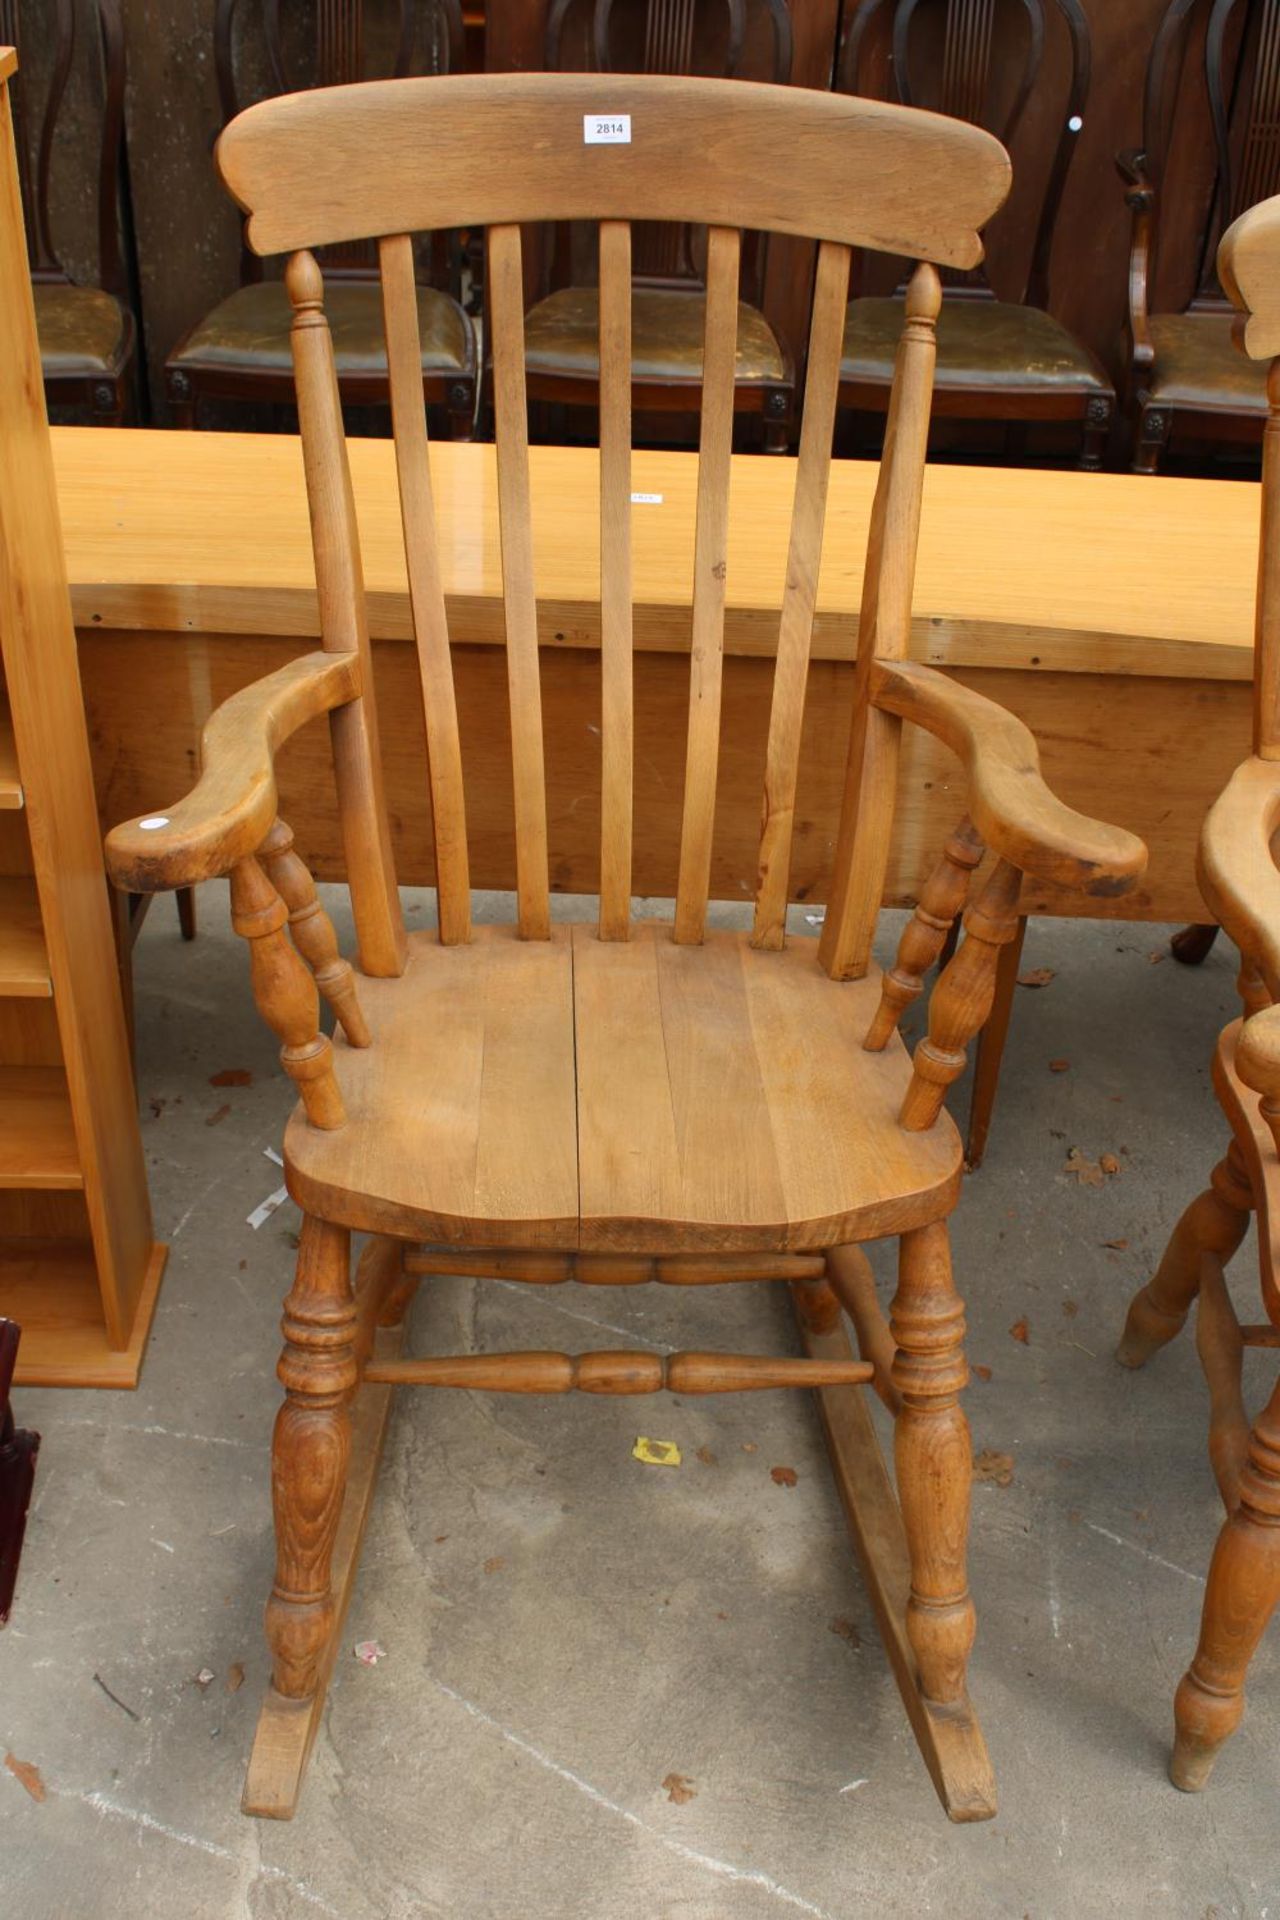 A VICTORIAN STYLE BEECH ROCKING CHAIR